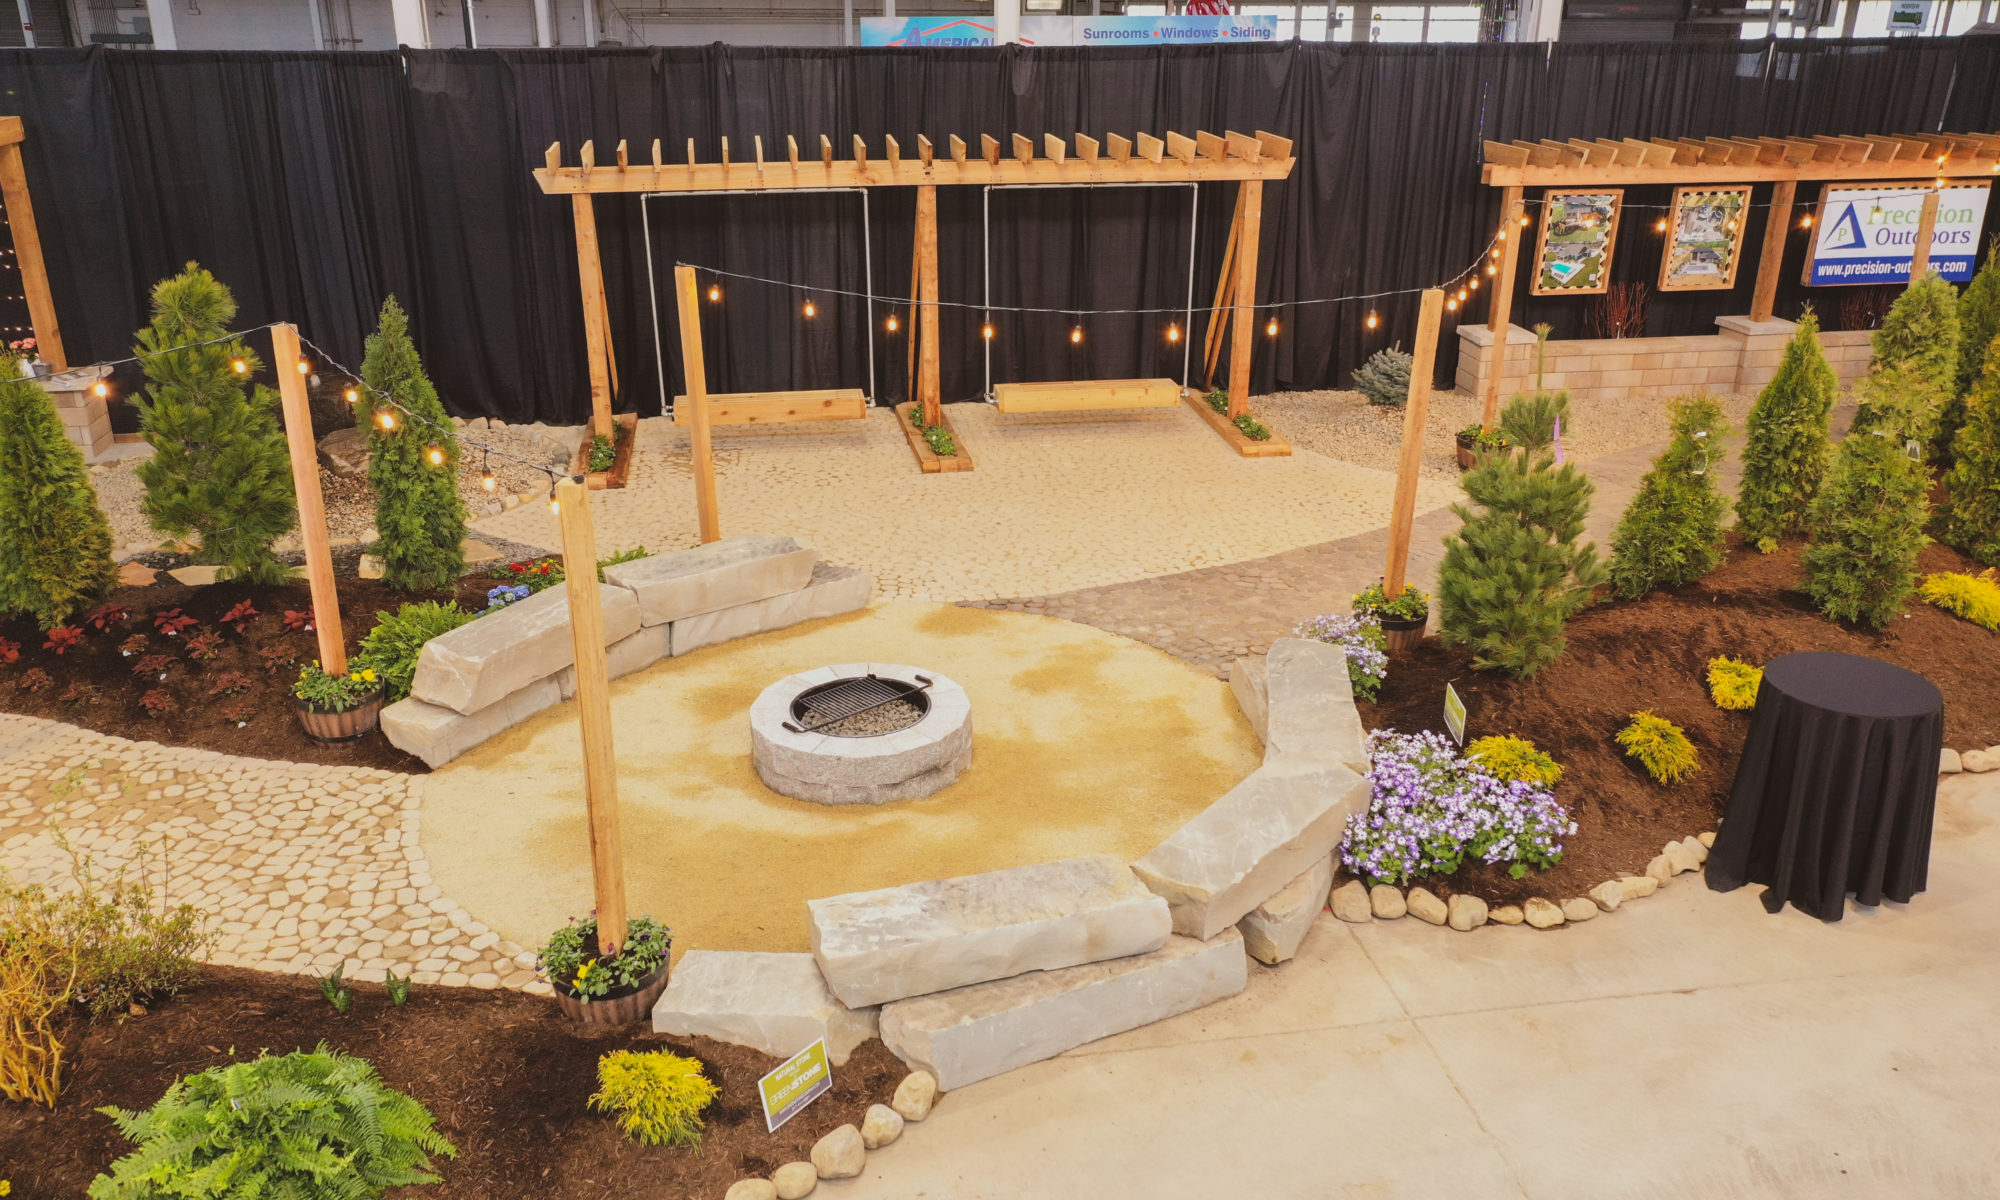 indiana indianapolis flower and patio show 2022 pergola firepit swing swings lighting landscaping